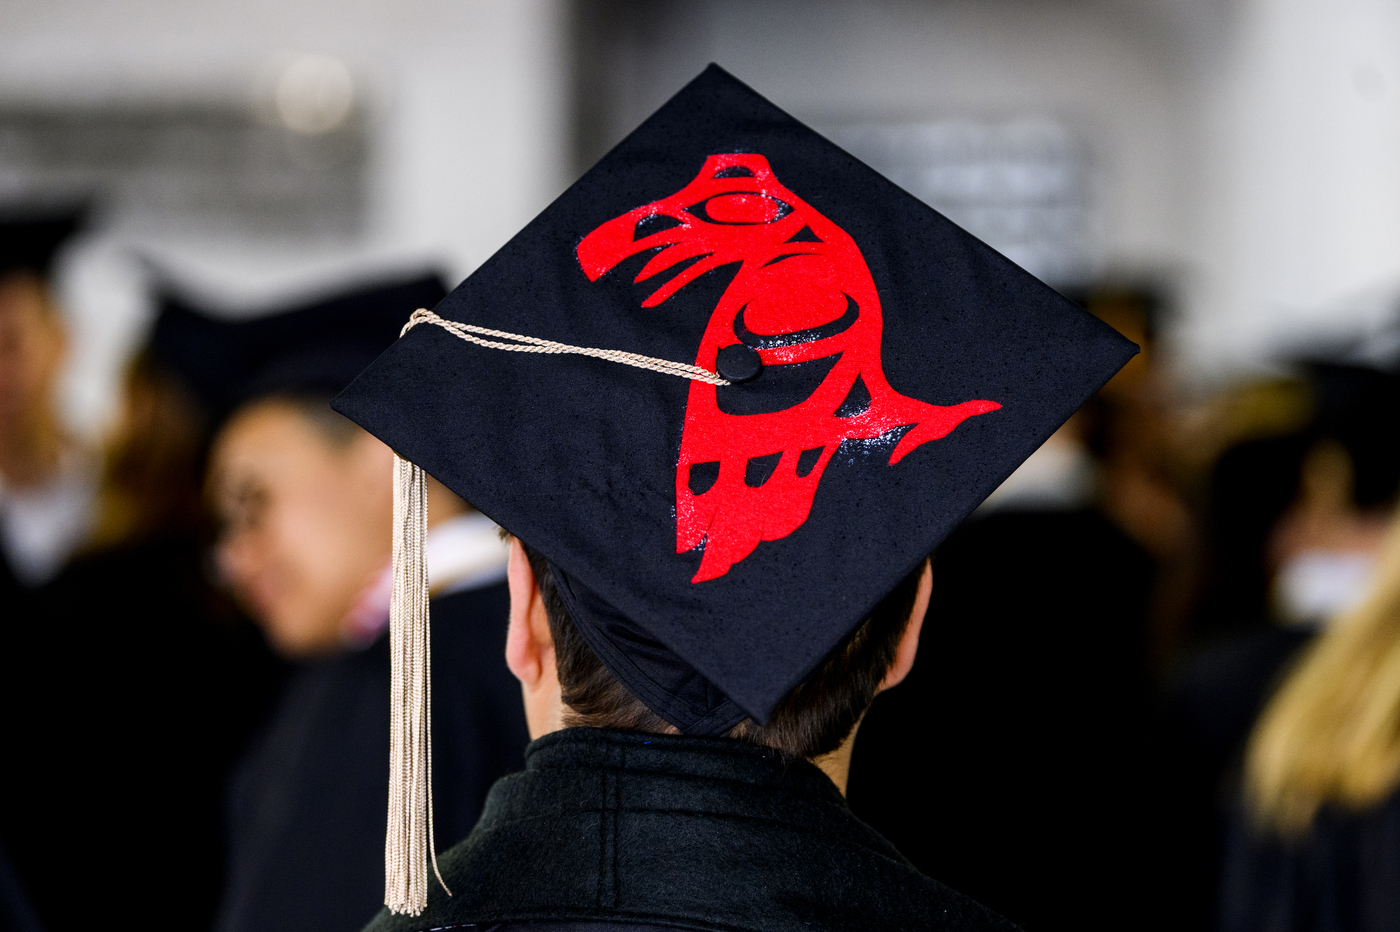 Christian Gomez showing his mortarboard.